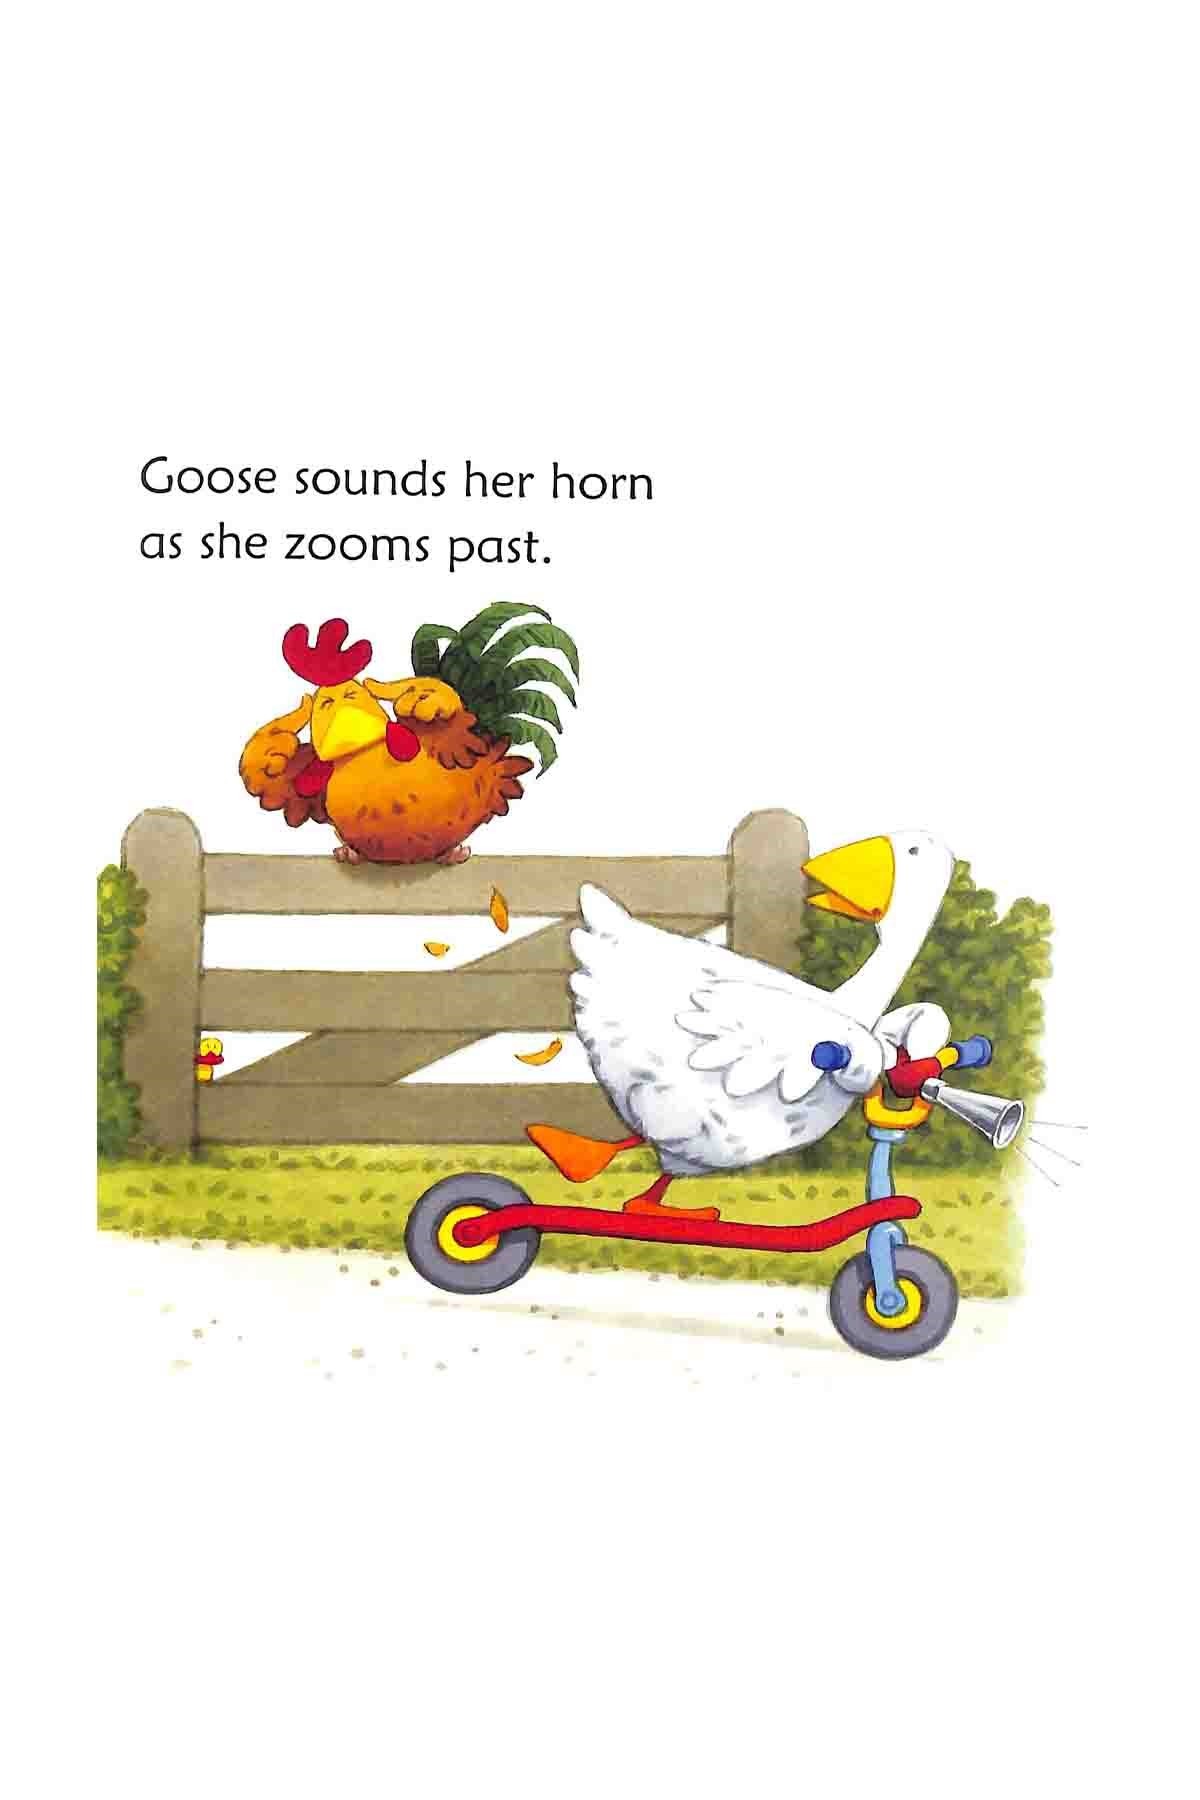 The Usborne Goose On The Loose